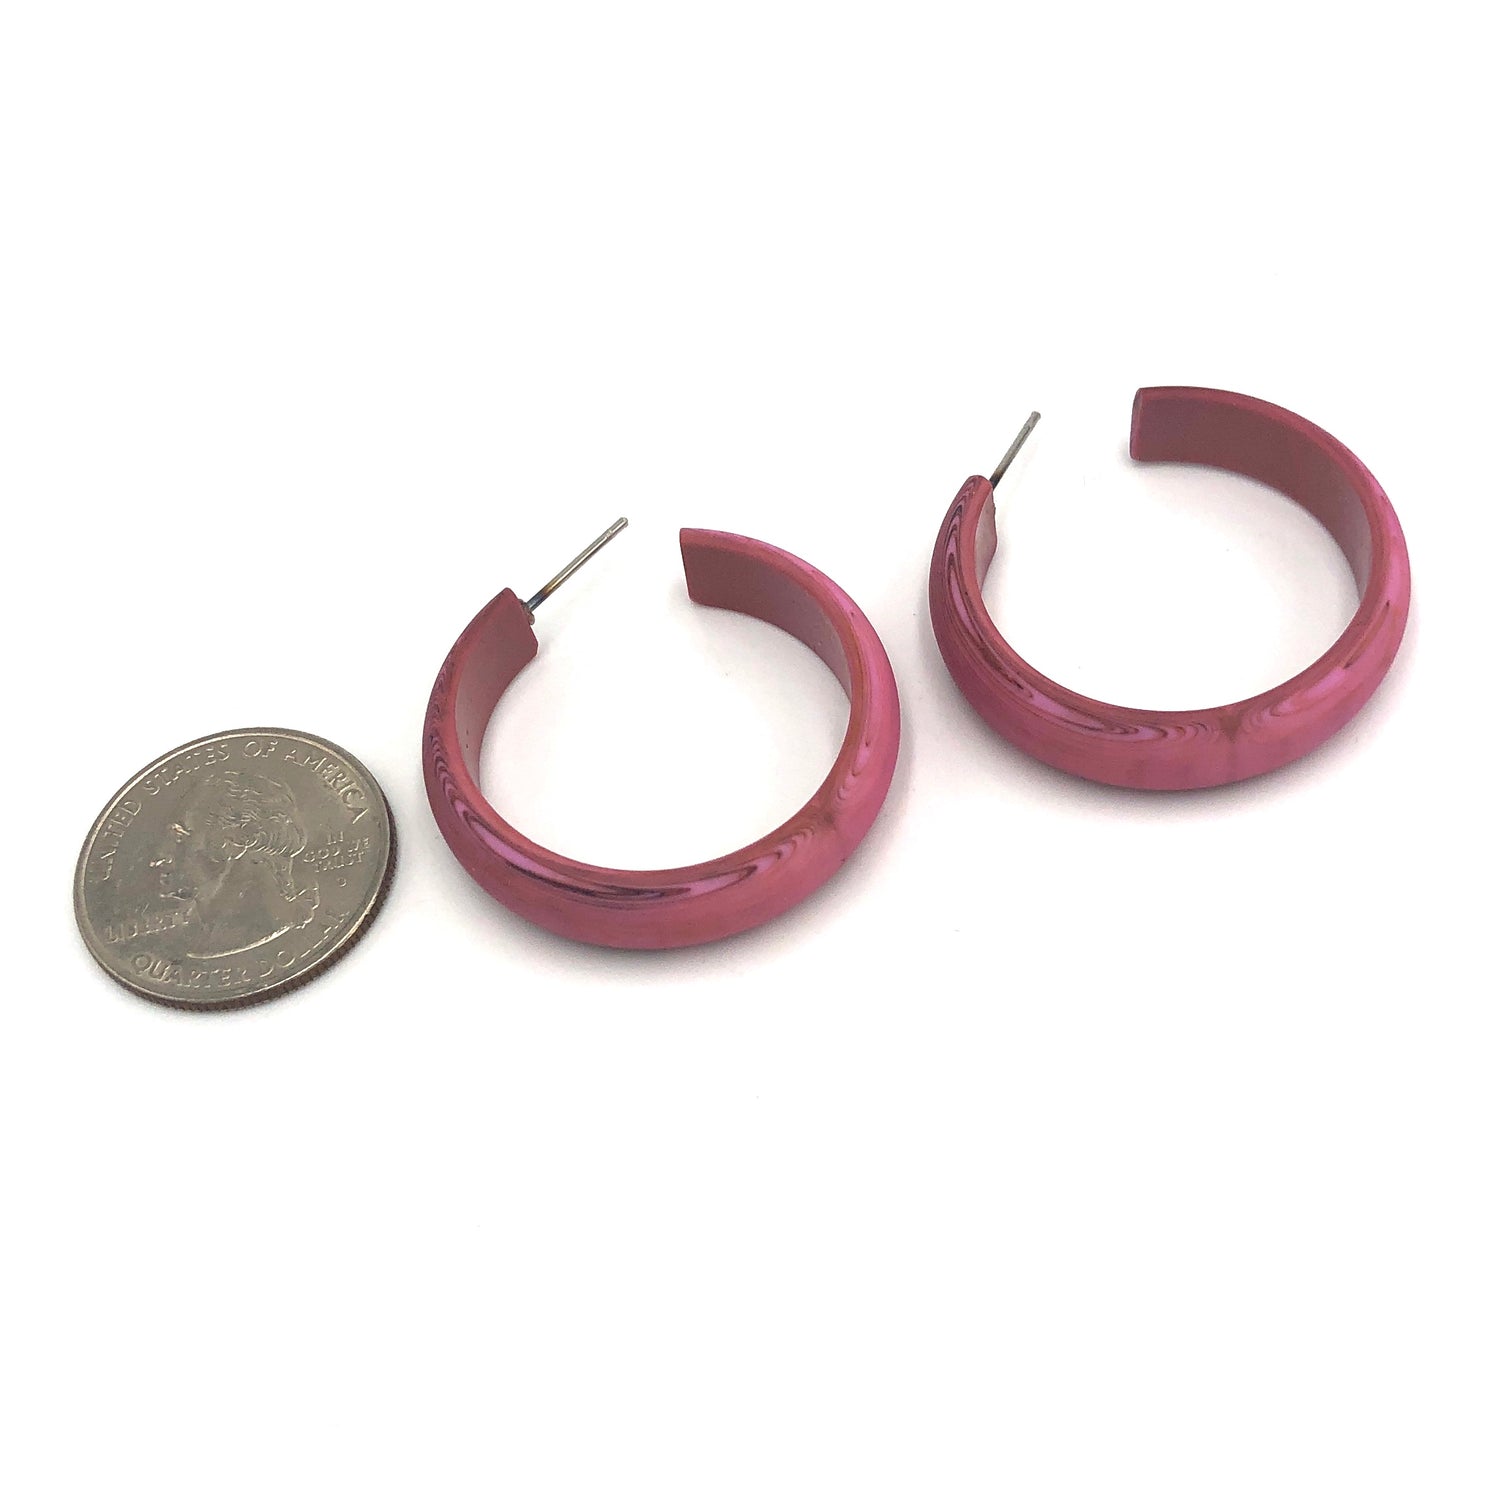 dusty marbled pink hoop earrings with quarter in picture to show size